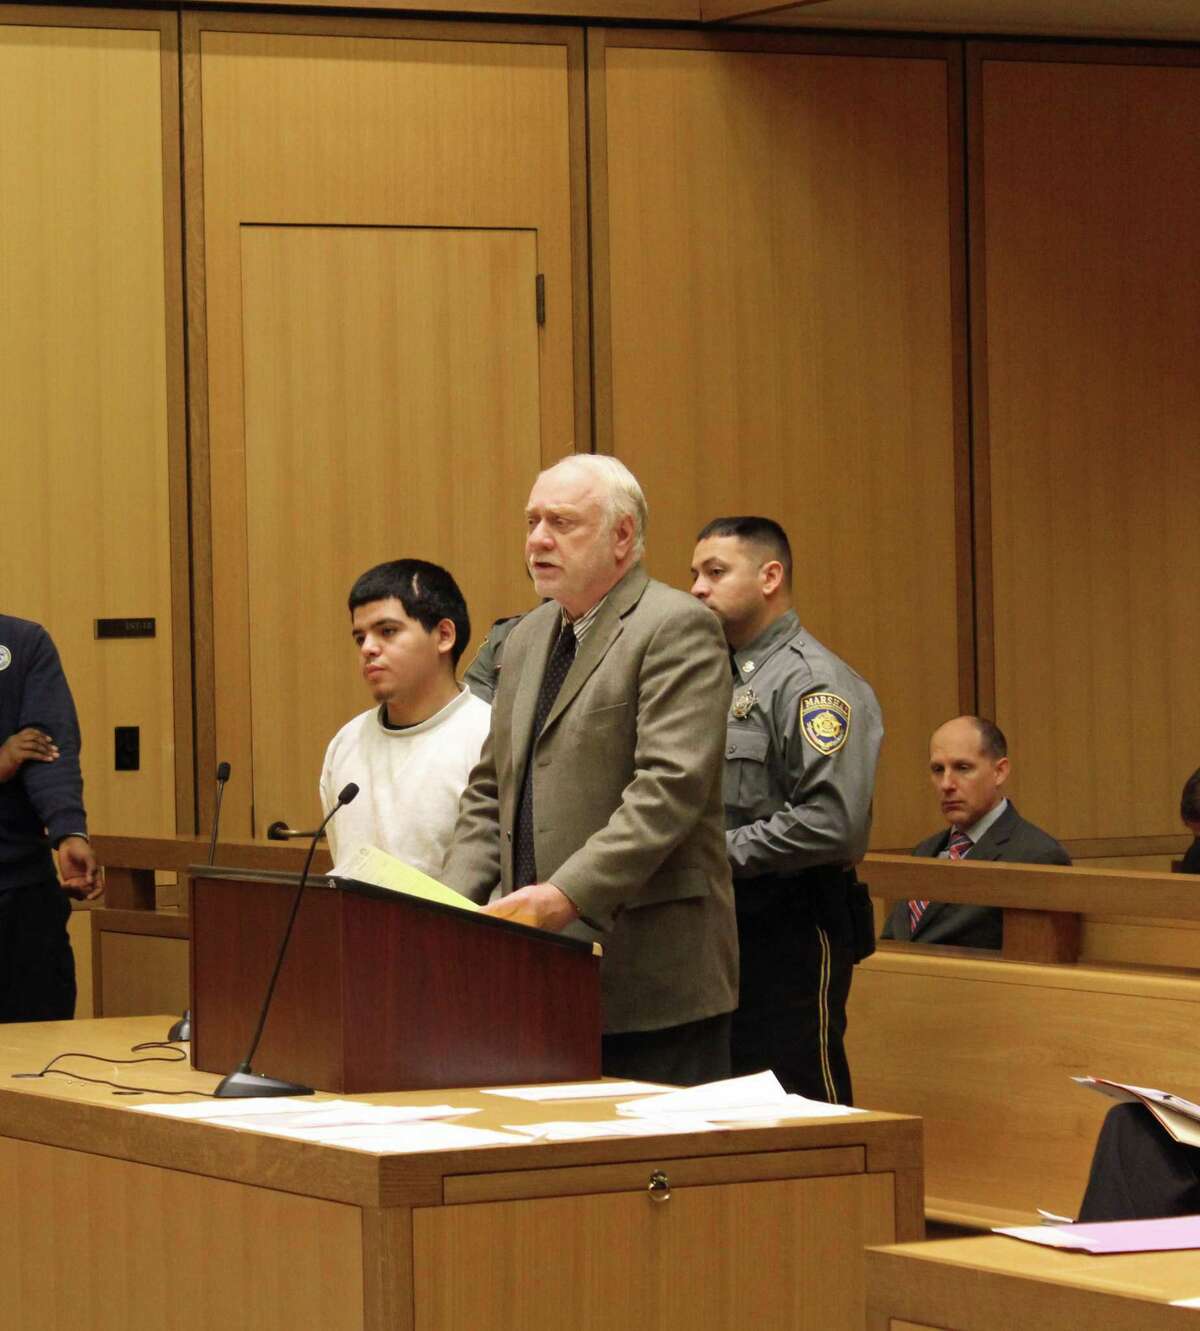 Jerry Diaz, 18, was arraigned at Stamford Supreme Court Nov. 19 with a number of charges including two counts of second-degree manslaughter. Diaz was the driver of the Nissan Altima that crashed into two utility poles in the South End on Aug. 26 that resulted in the deaths of two passengers.